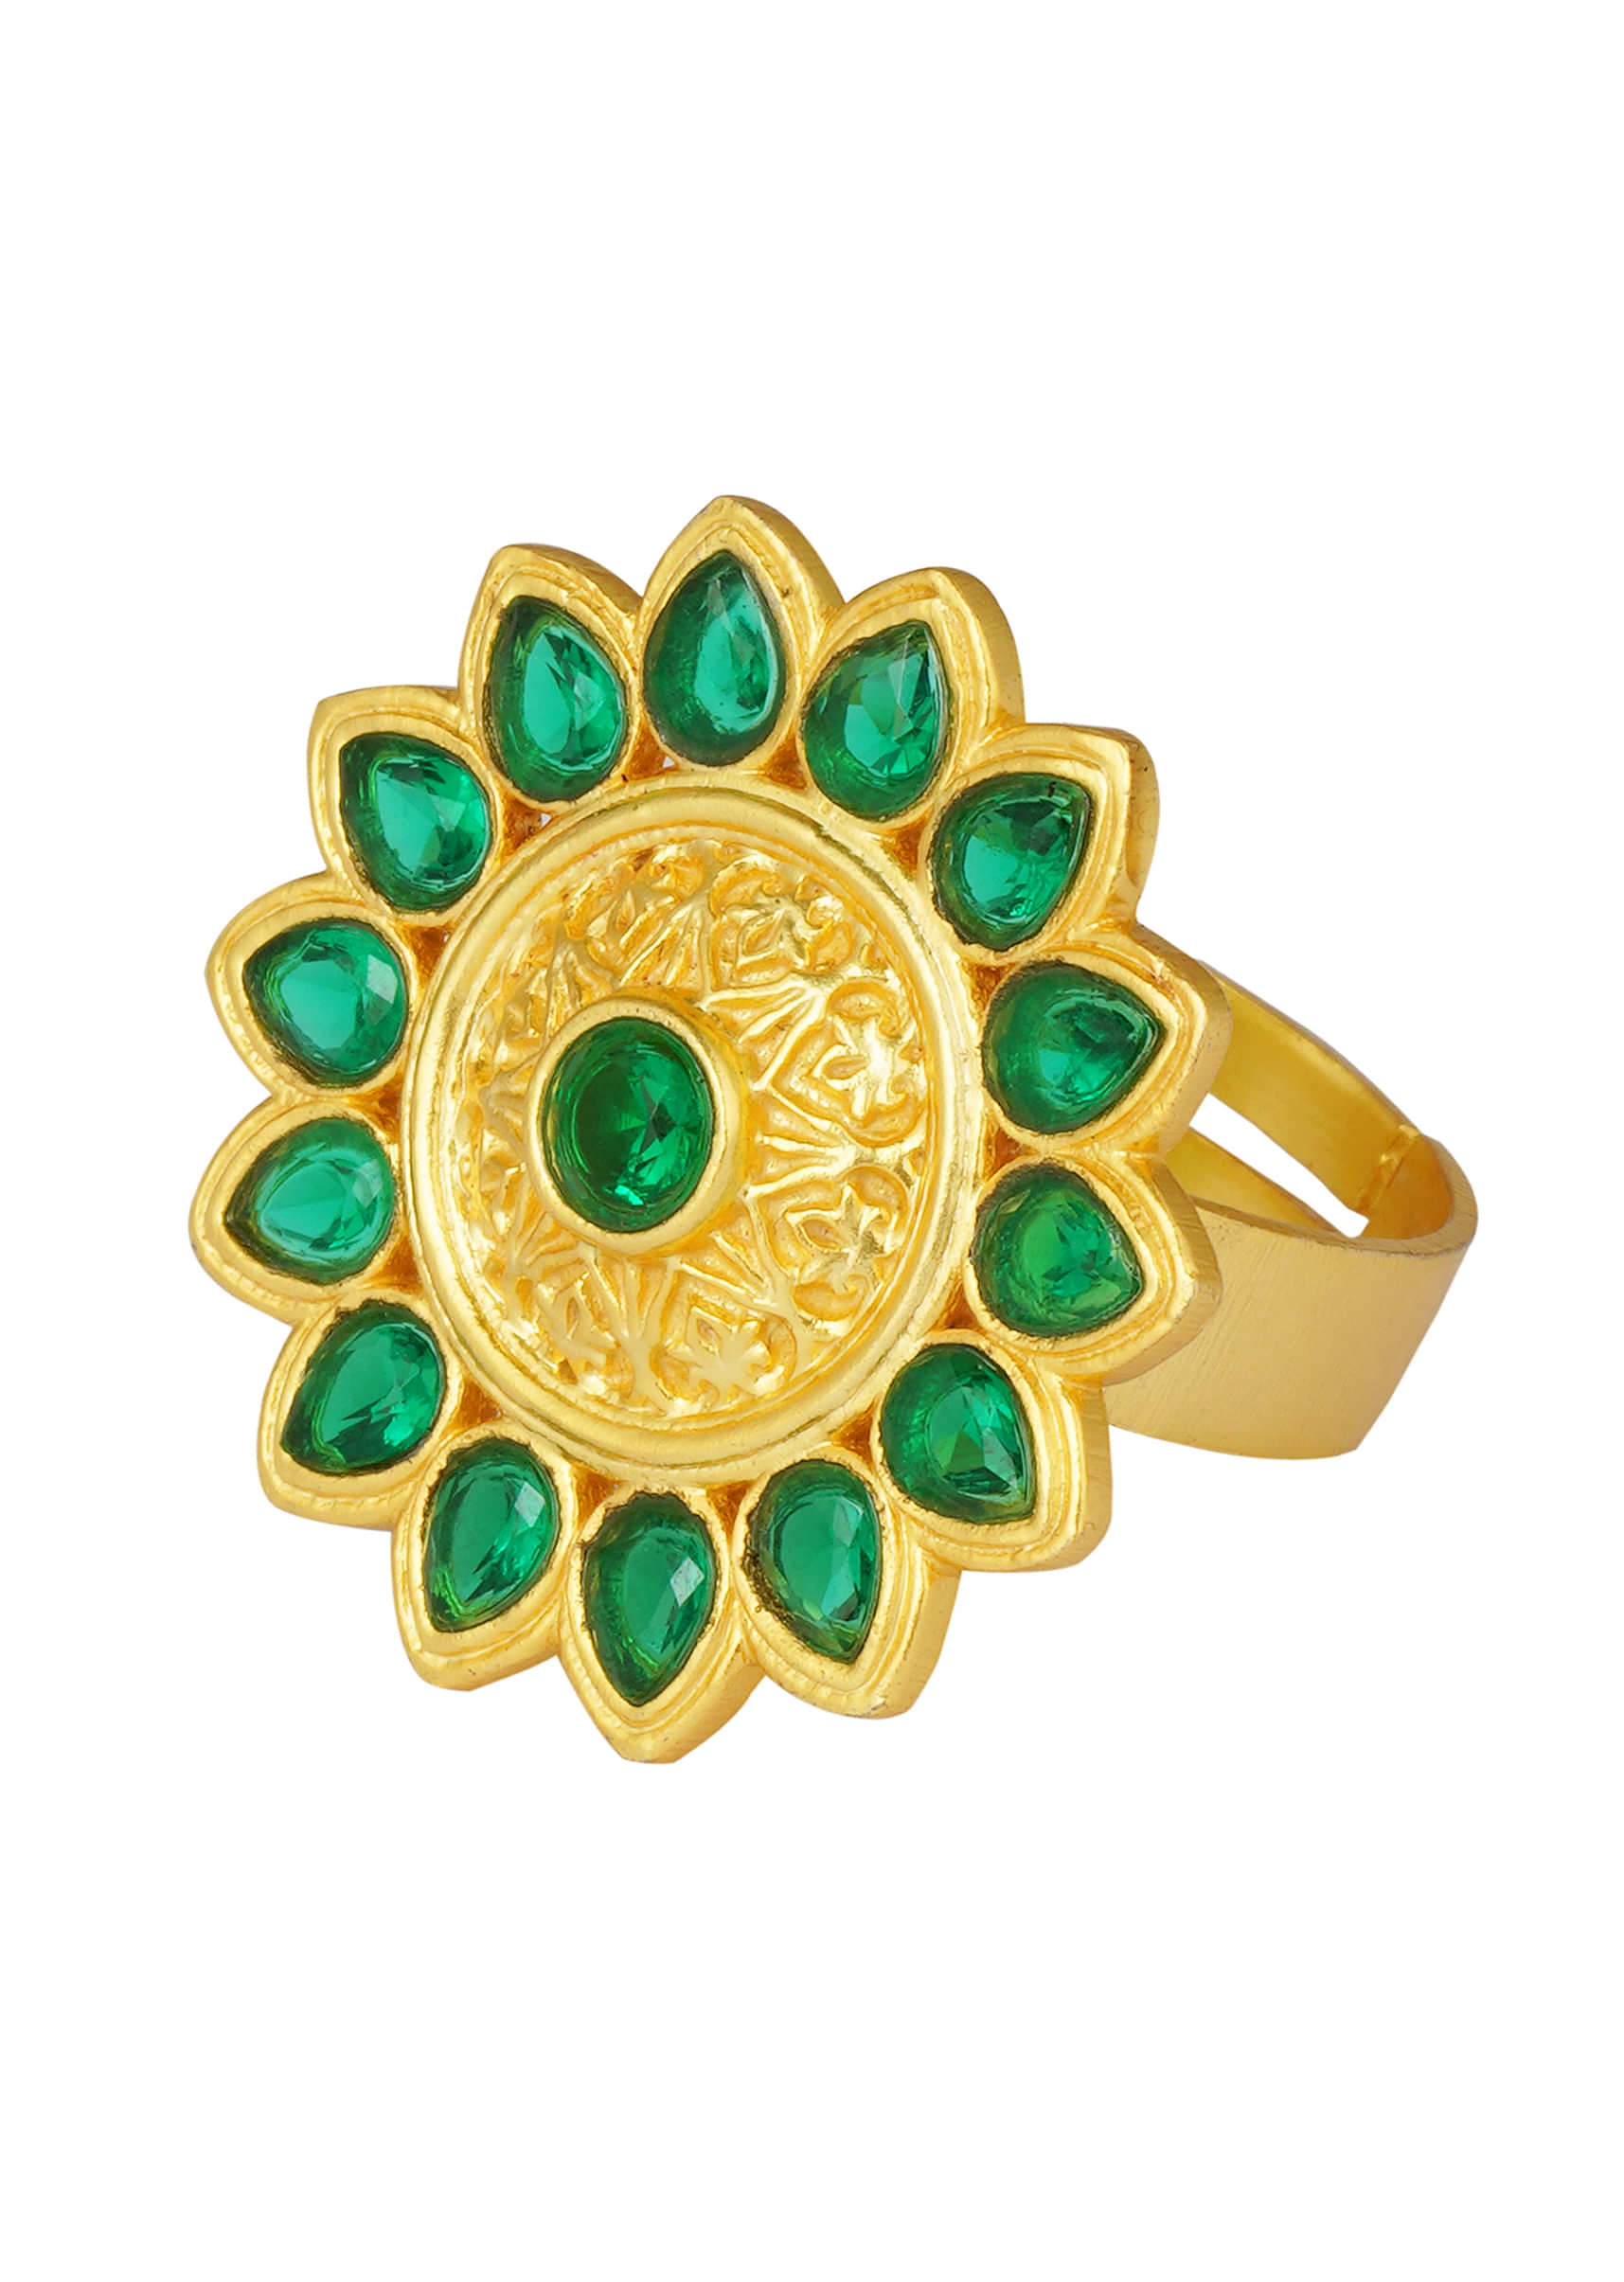 Green Stone Studded Ring Floral Design With 22Kt Gold Plating By Zariin